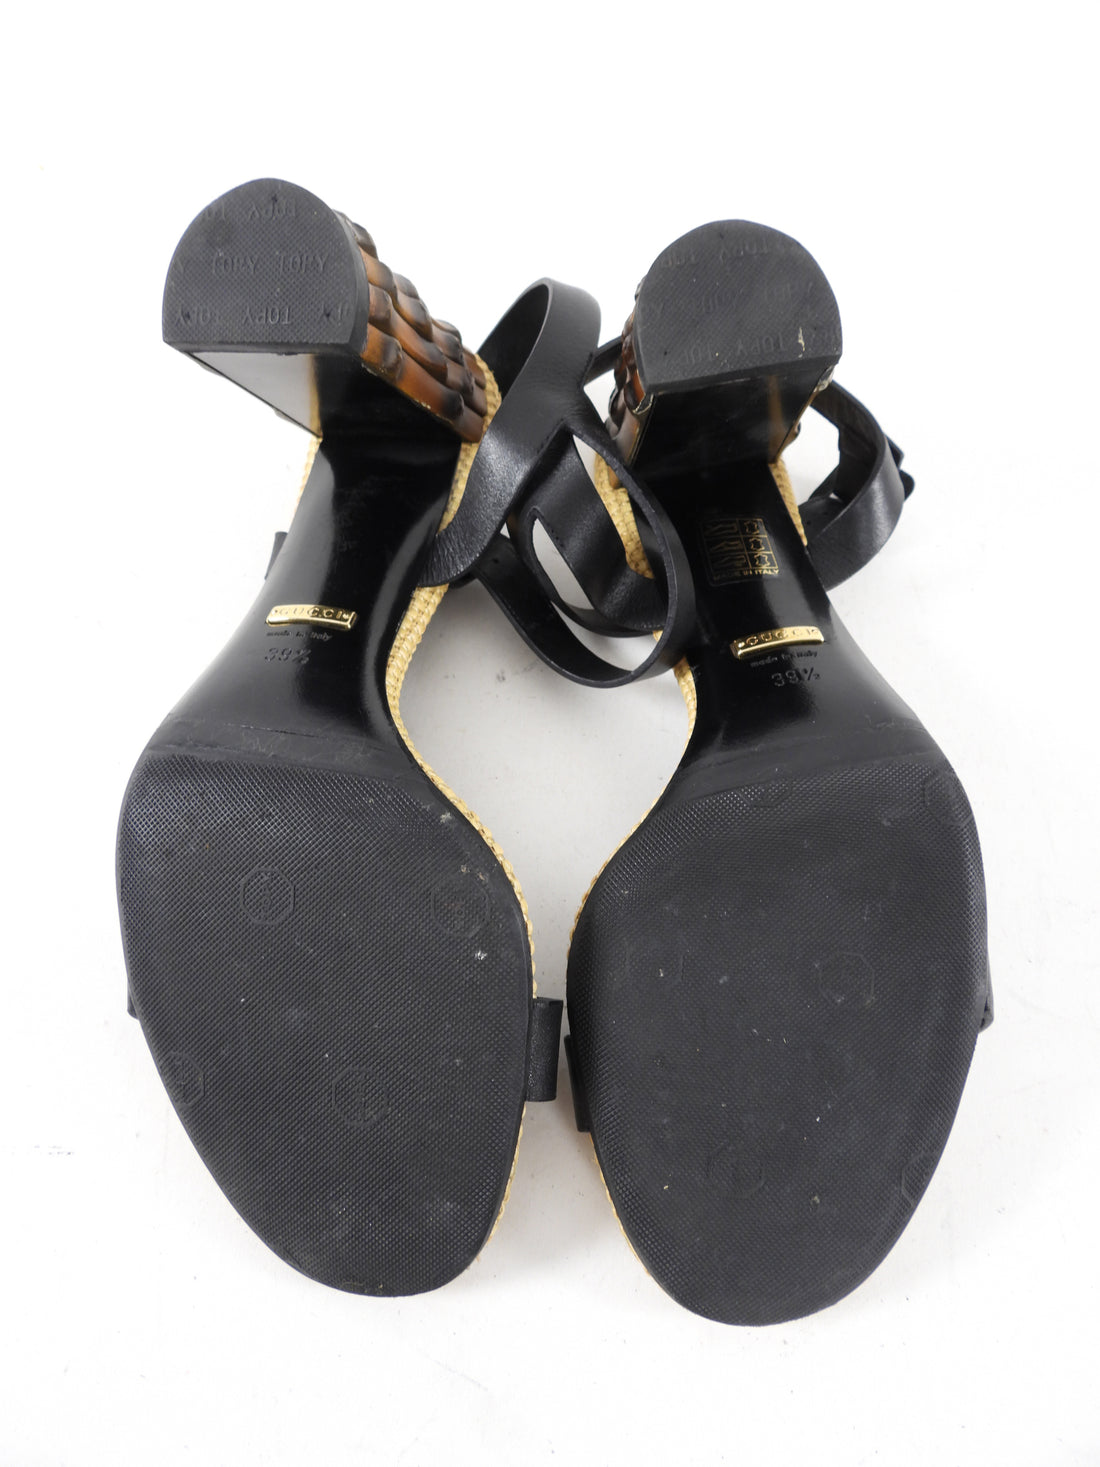 Gucci Bamboo Heel Black Leather Sandals - 39.5 / 9.5